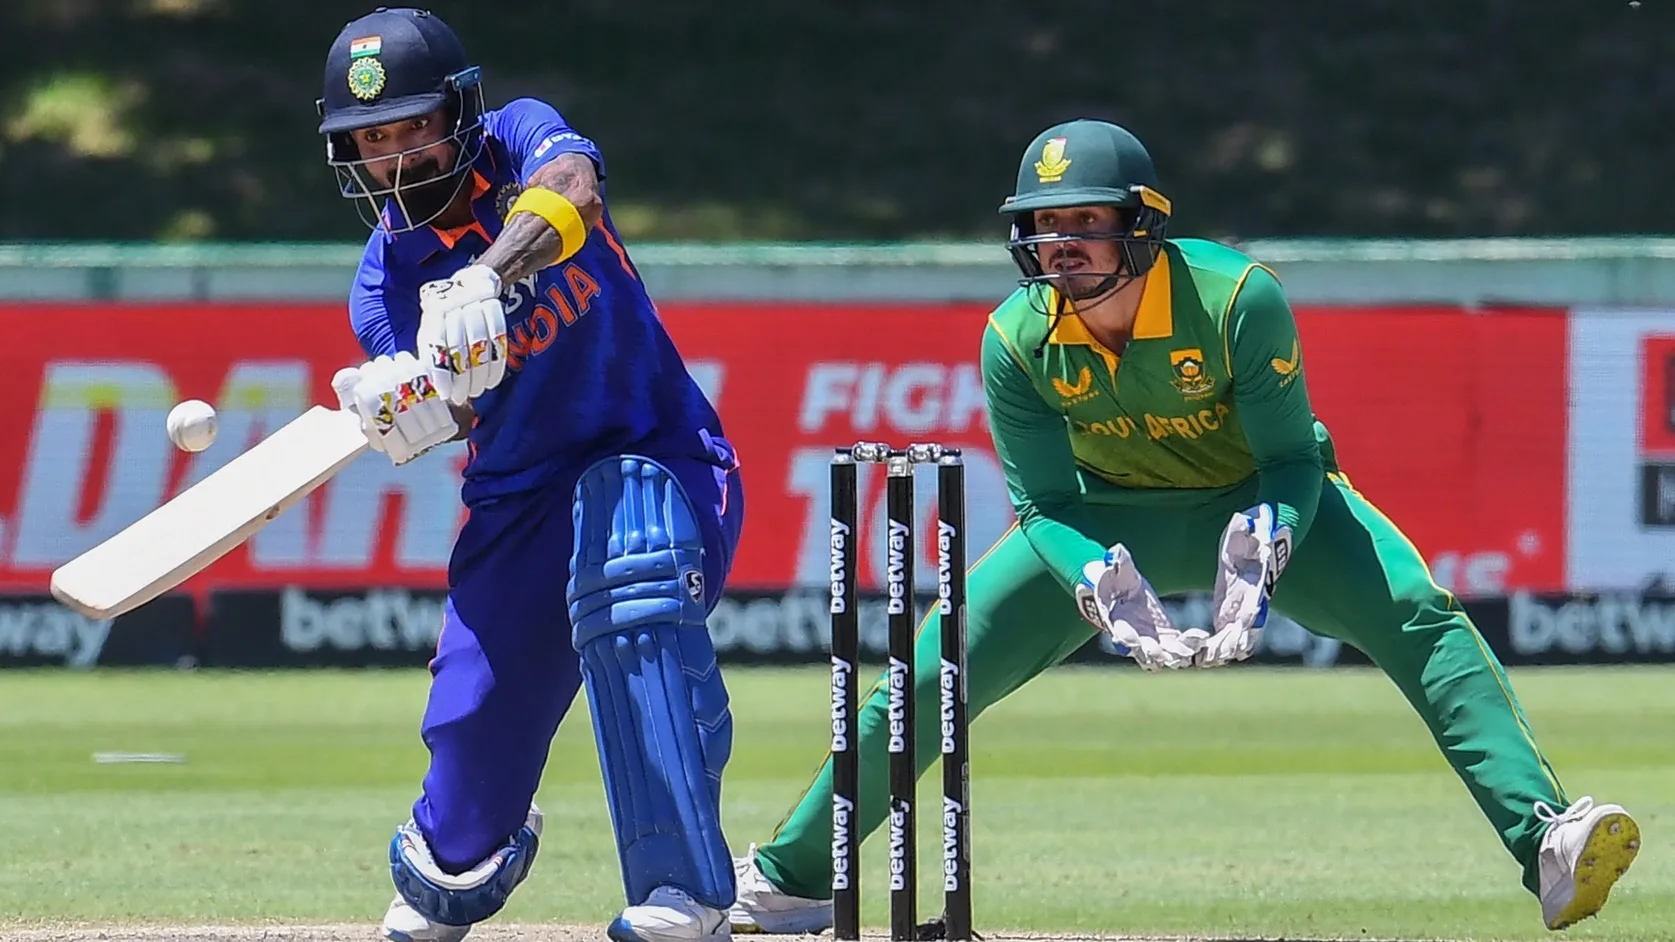 India Vs South Africa T20 World Cup Live Streaming Free How to watch IND vs SA 2nd T20 World Cup Live on Mobile and TV